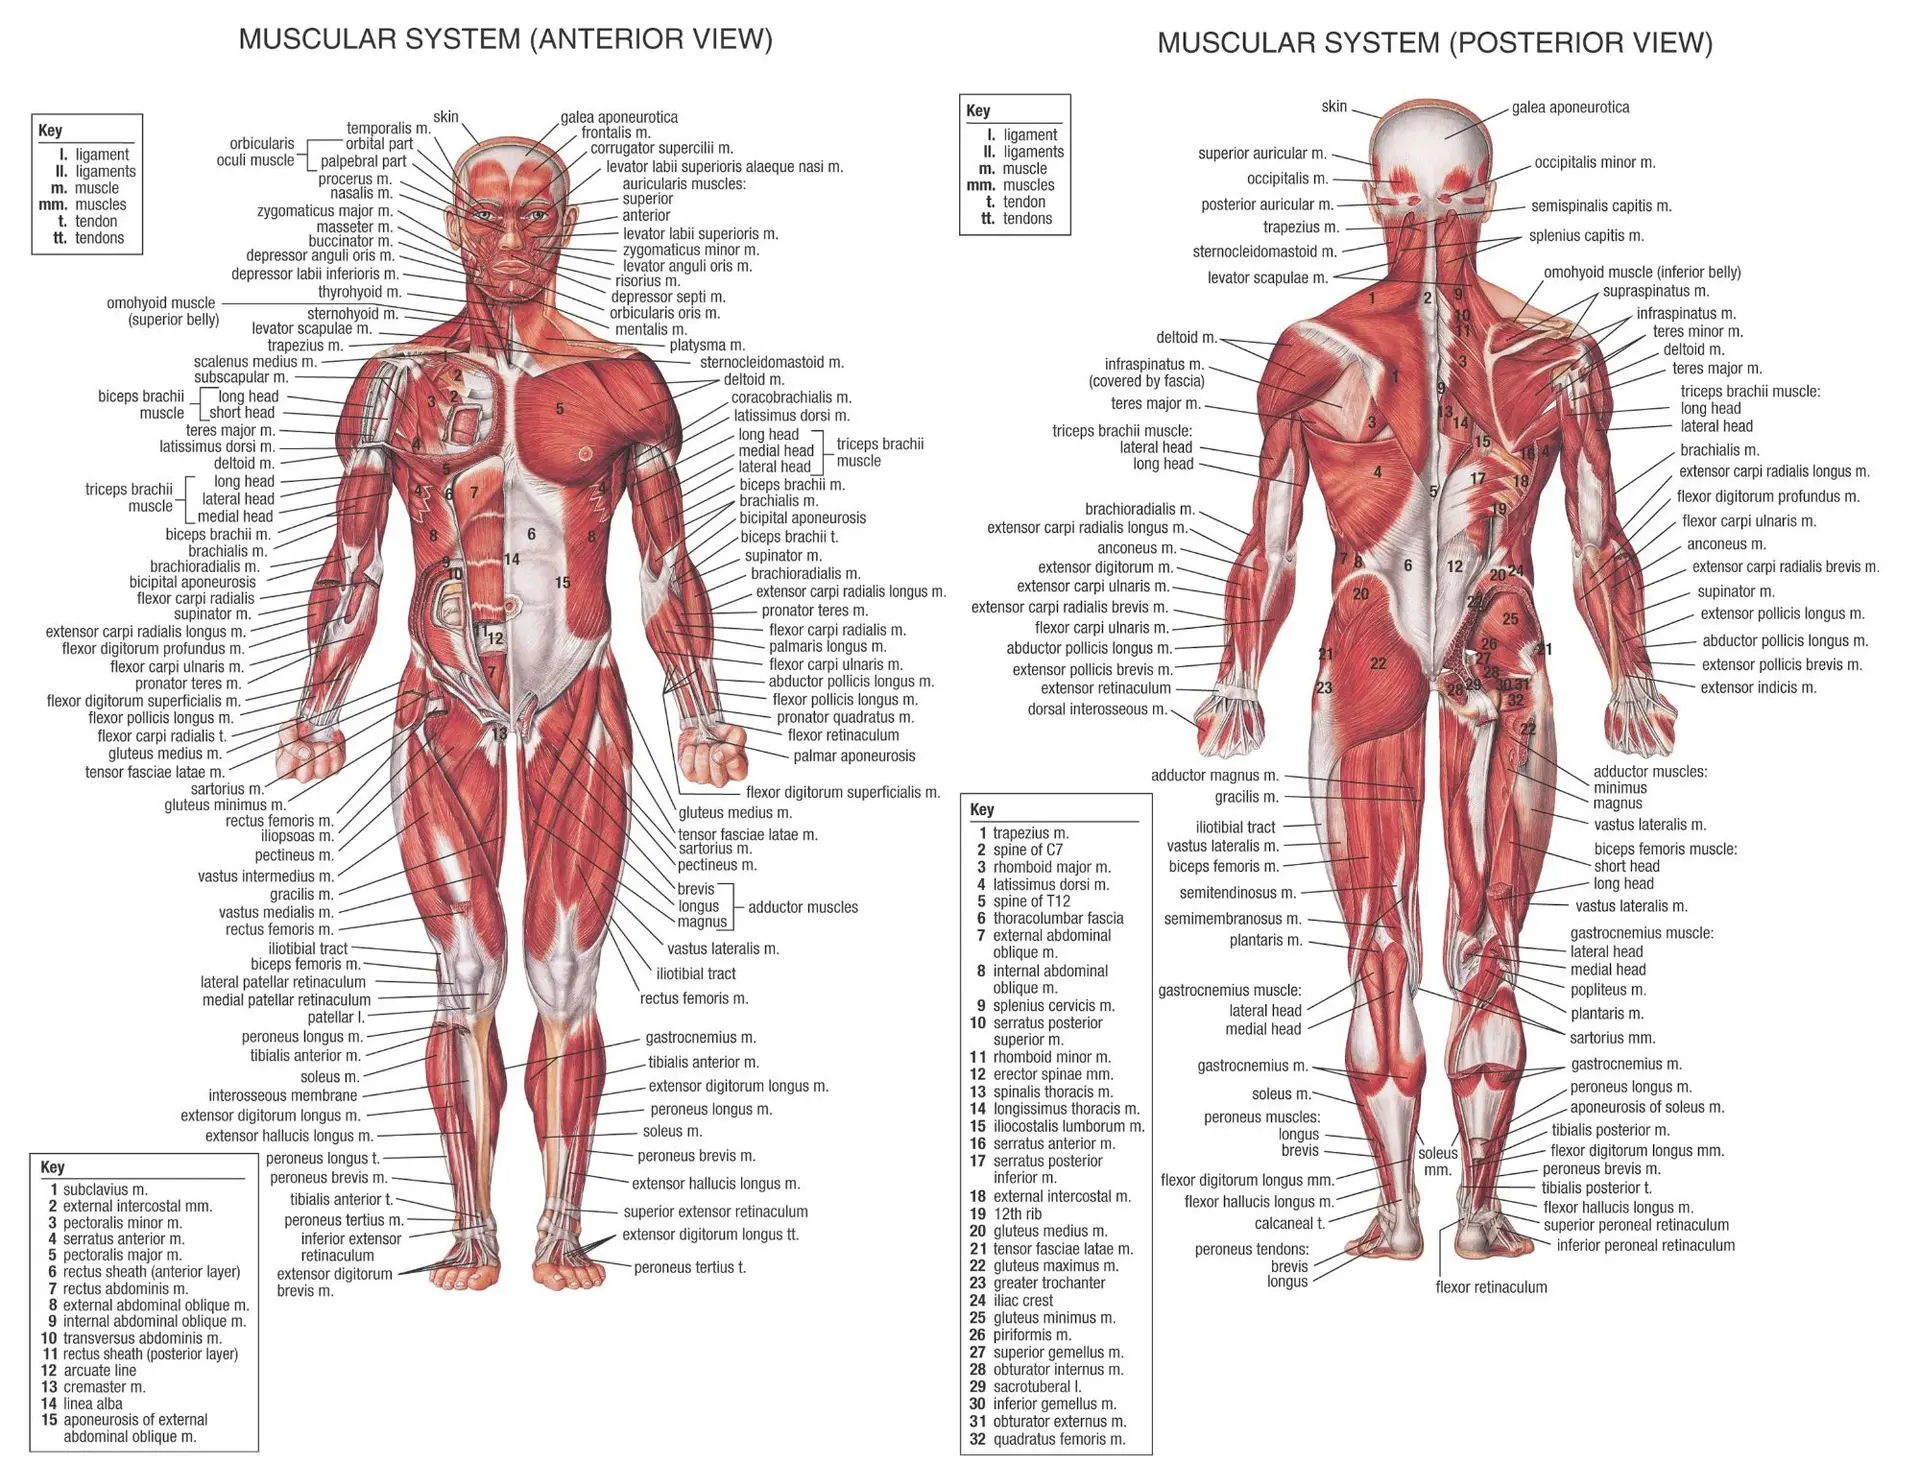 Common Muscular System Disorders